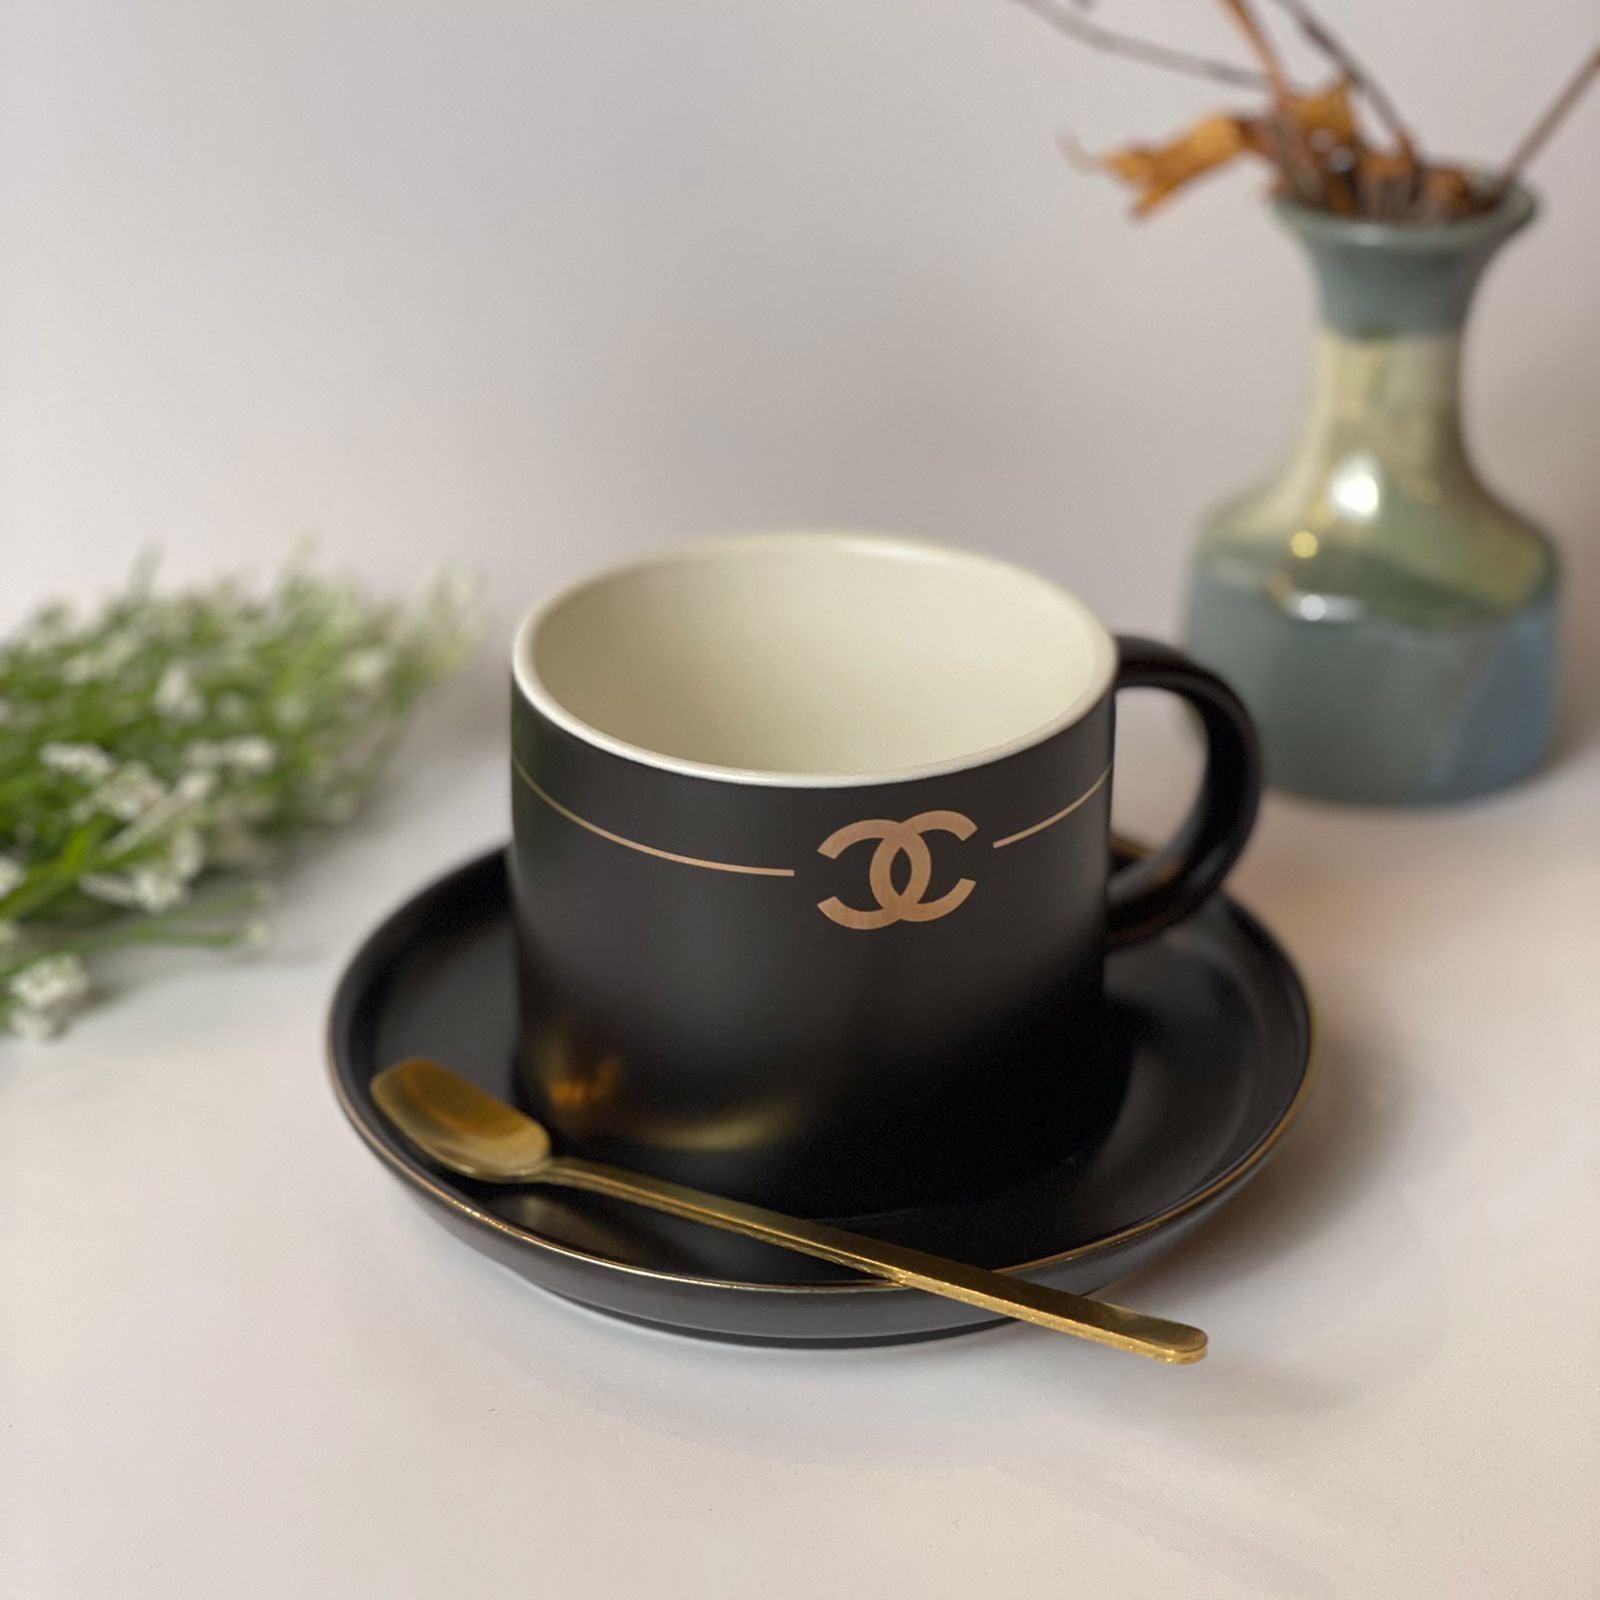 Chanel Cup With Saucer And Spoon